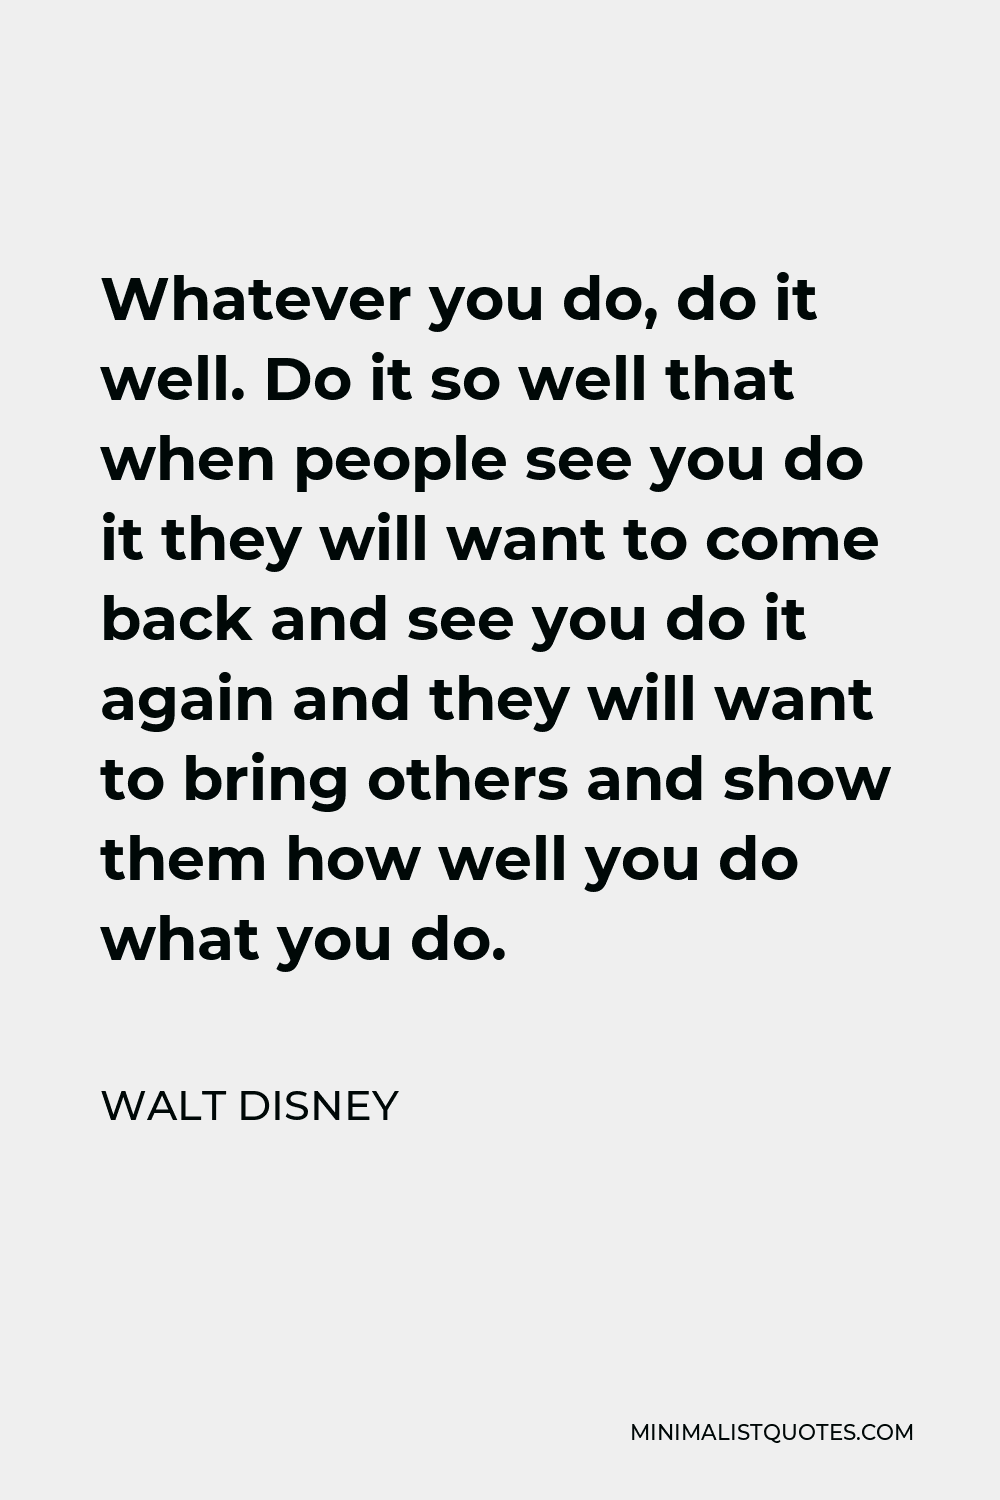 Walt Disney Quote - Whatever you do, do it well. Do it so well that when people see you do it they will want to come back and see you do it again and they will want to bring others and show them how well you do what you do.